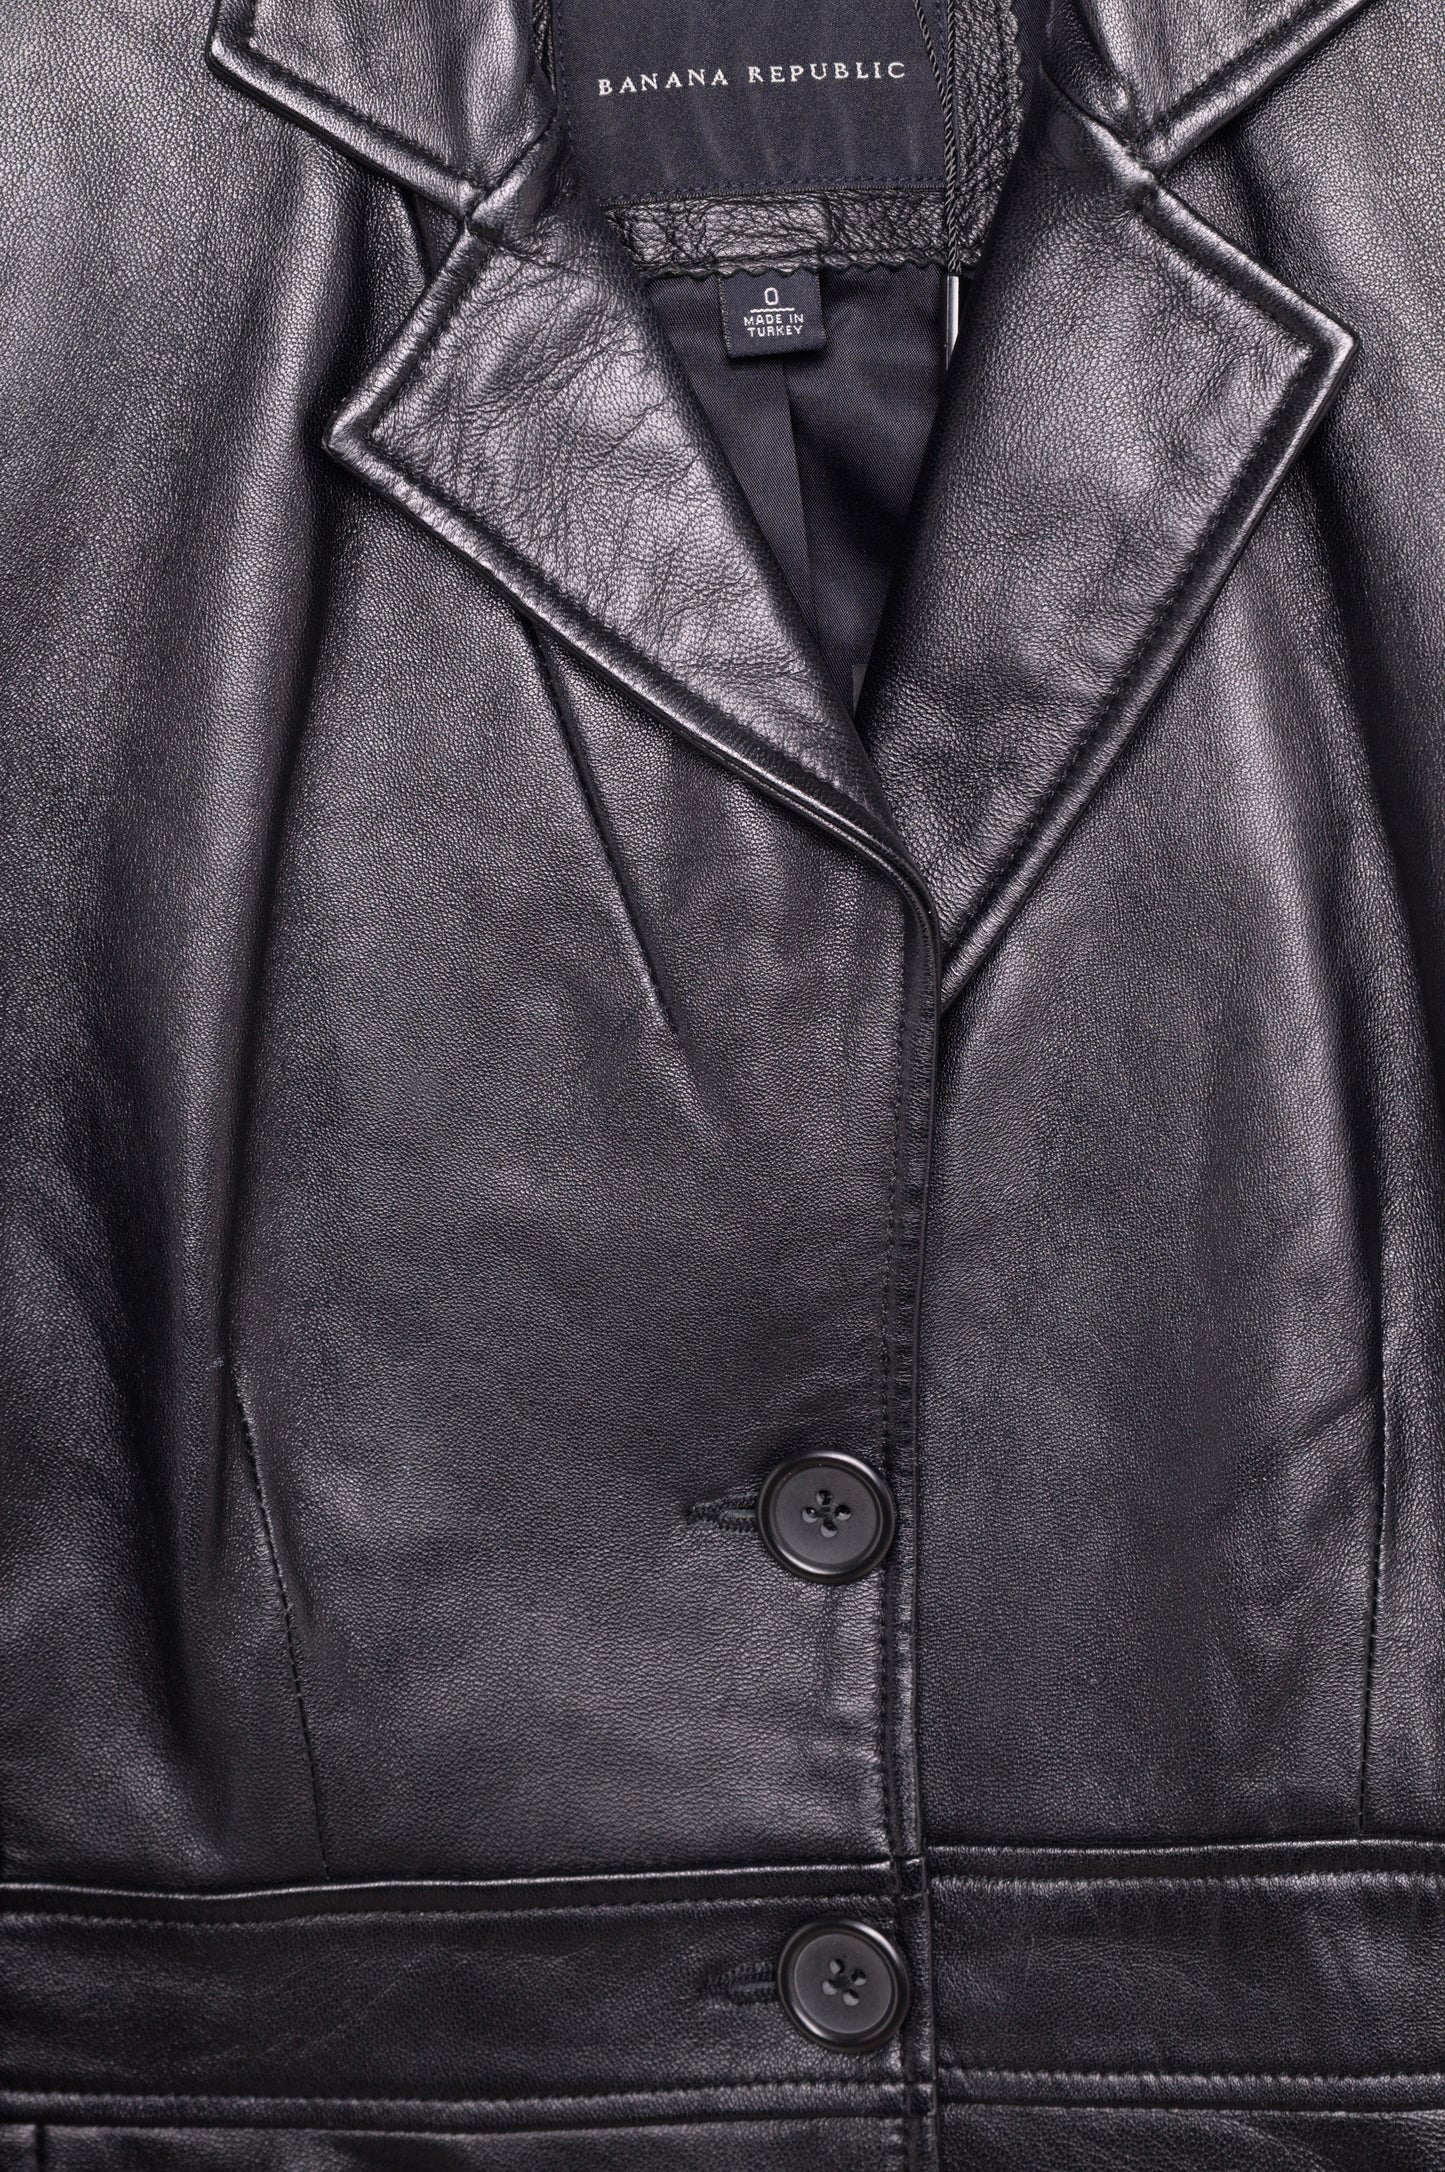 1990s Soft Button Leather Jacket